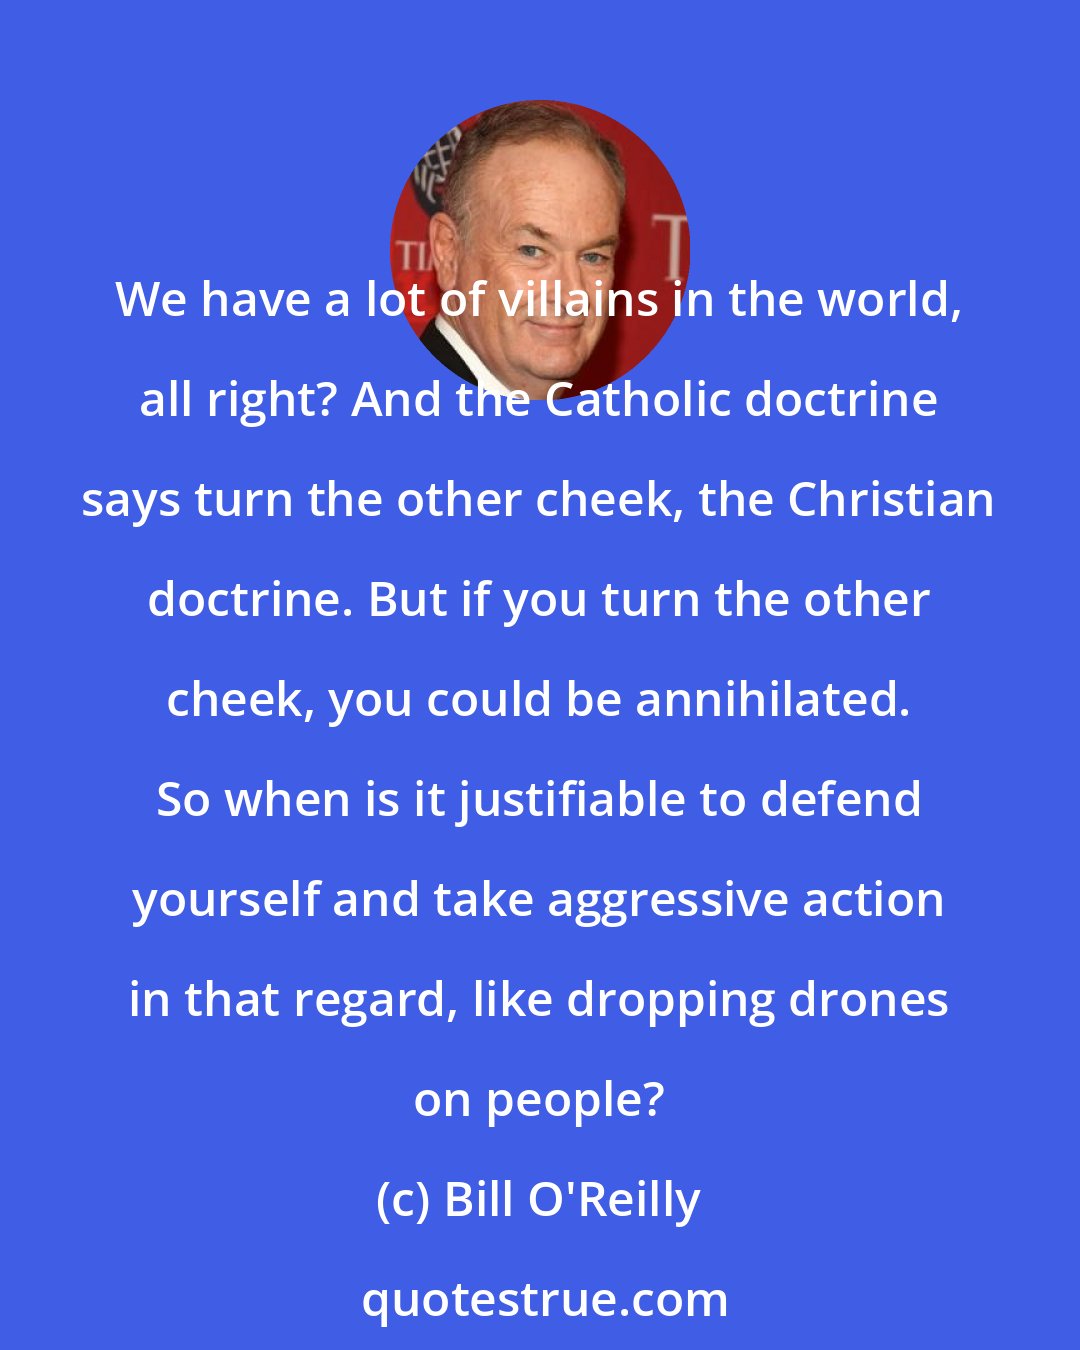 Bill O'Reilly: We have a lot of villains in the world, all right? And the Catholic doctrine says turn the other cheek, the Christian doctrine. But if you turn the other cheek, you could be annihilated. So when is it justifiable to defend yourself and take aggressive action in that regard, like dropping drones on people?